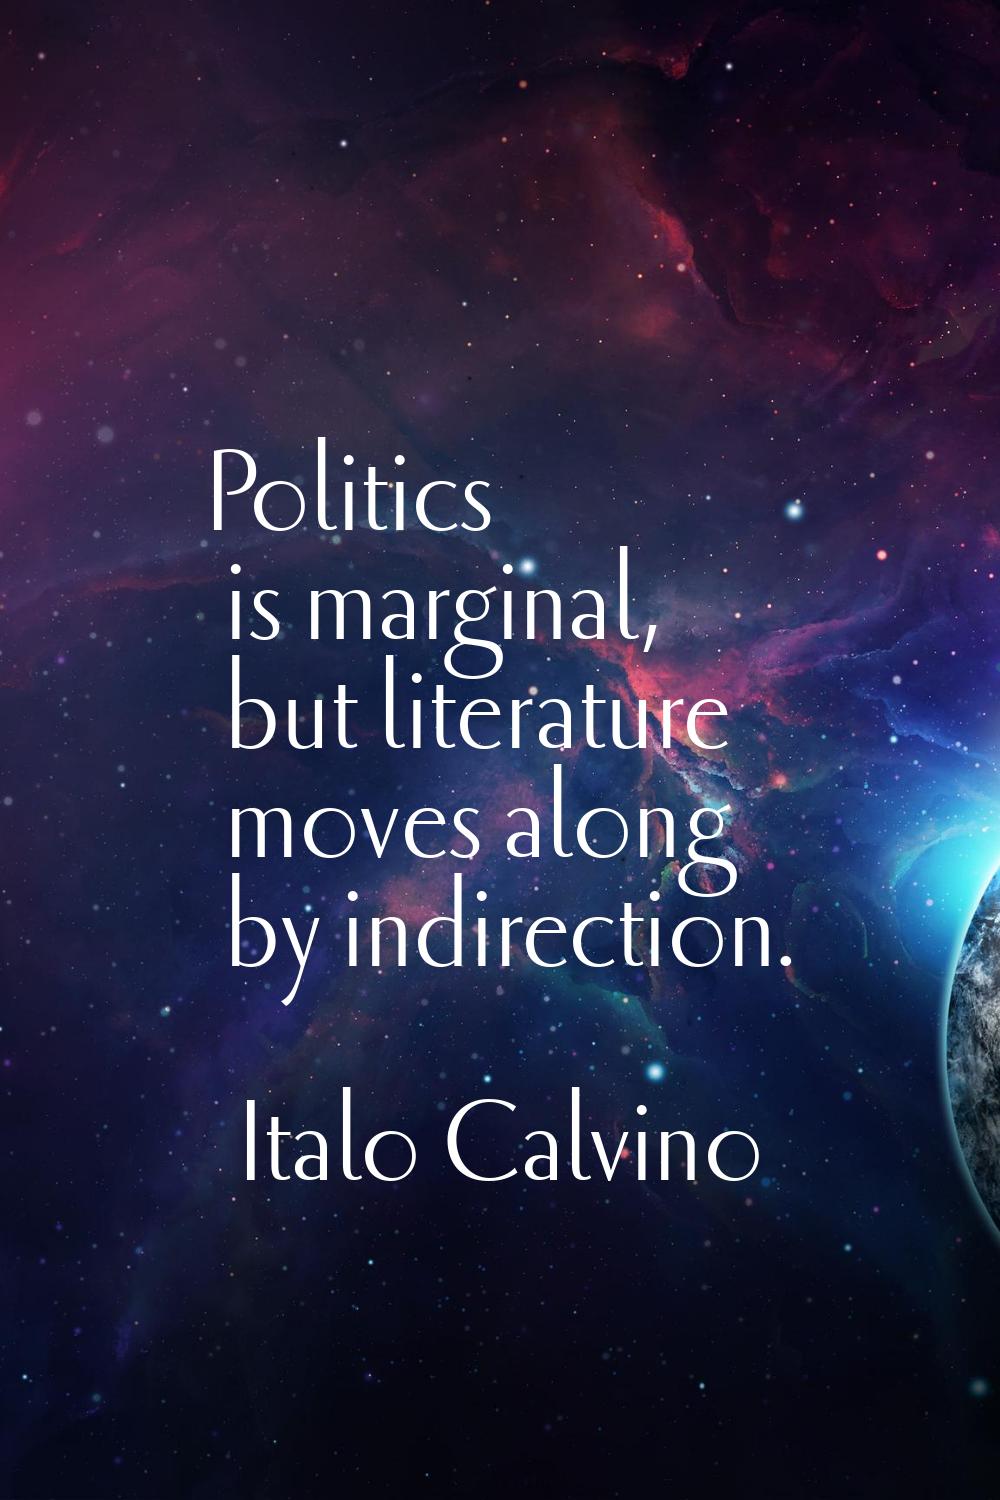 Politics is marginal, but literature moves along by indirection.